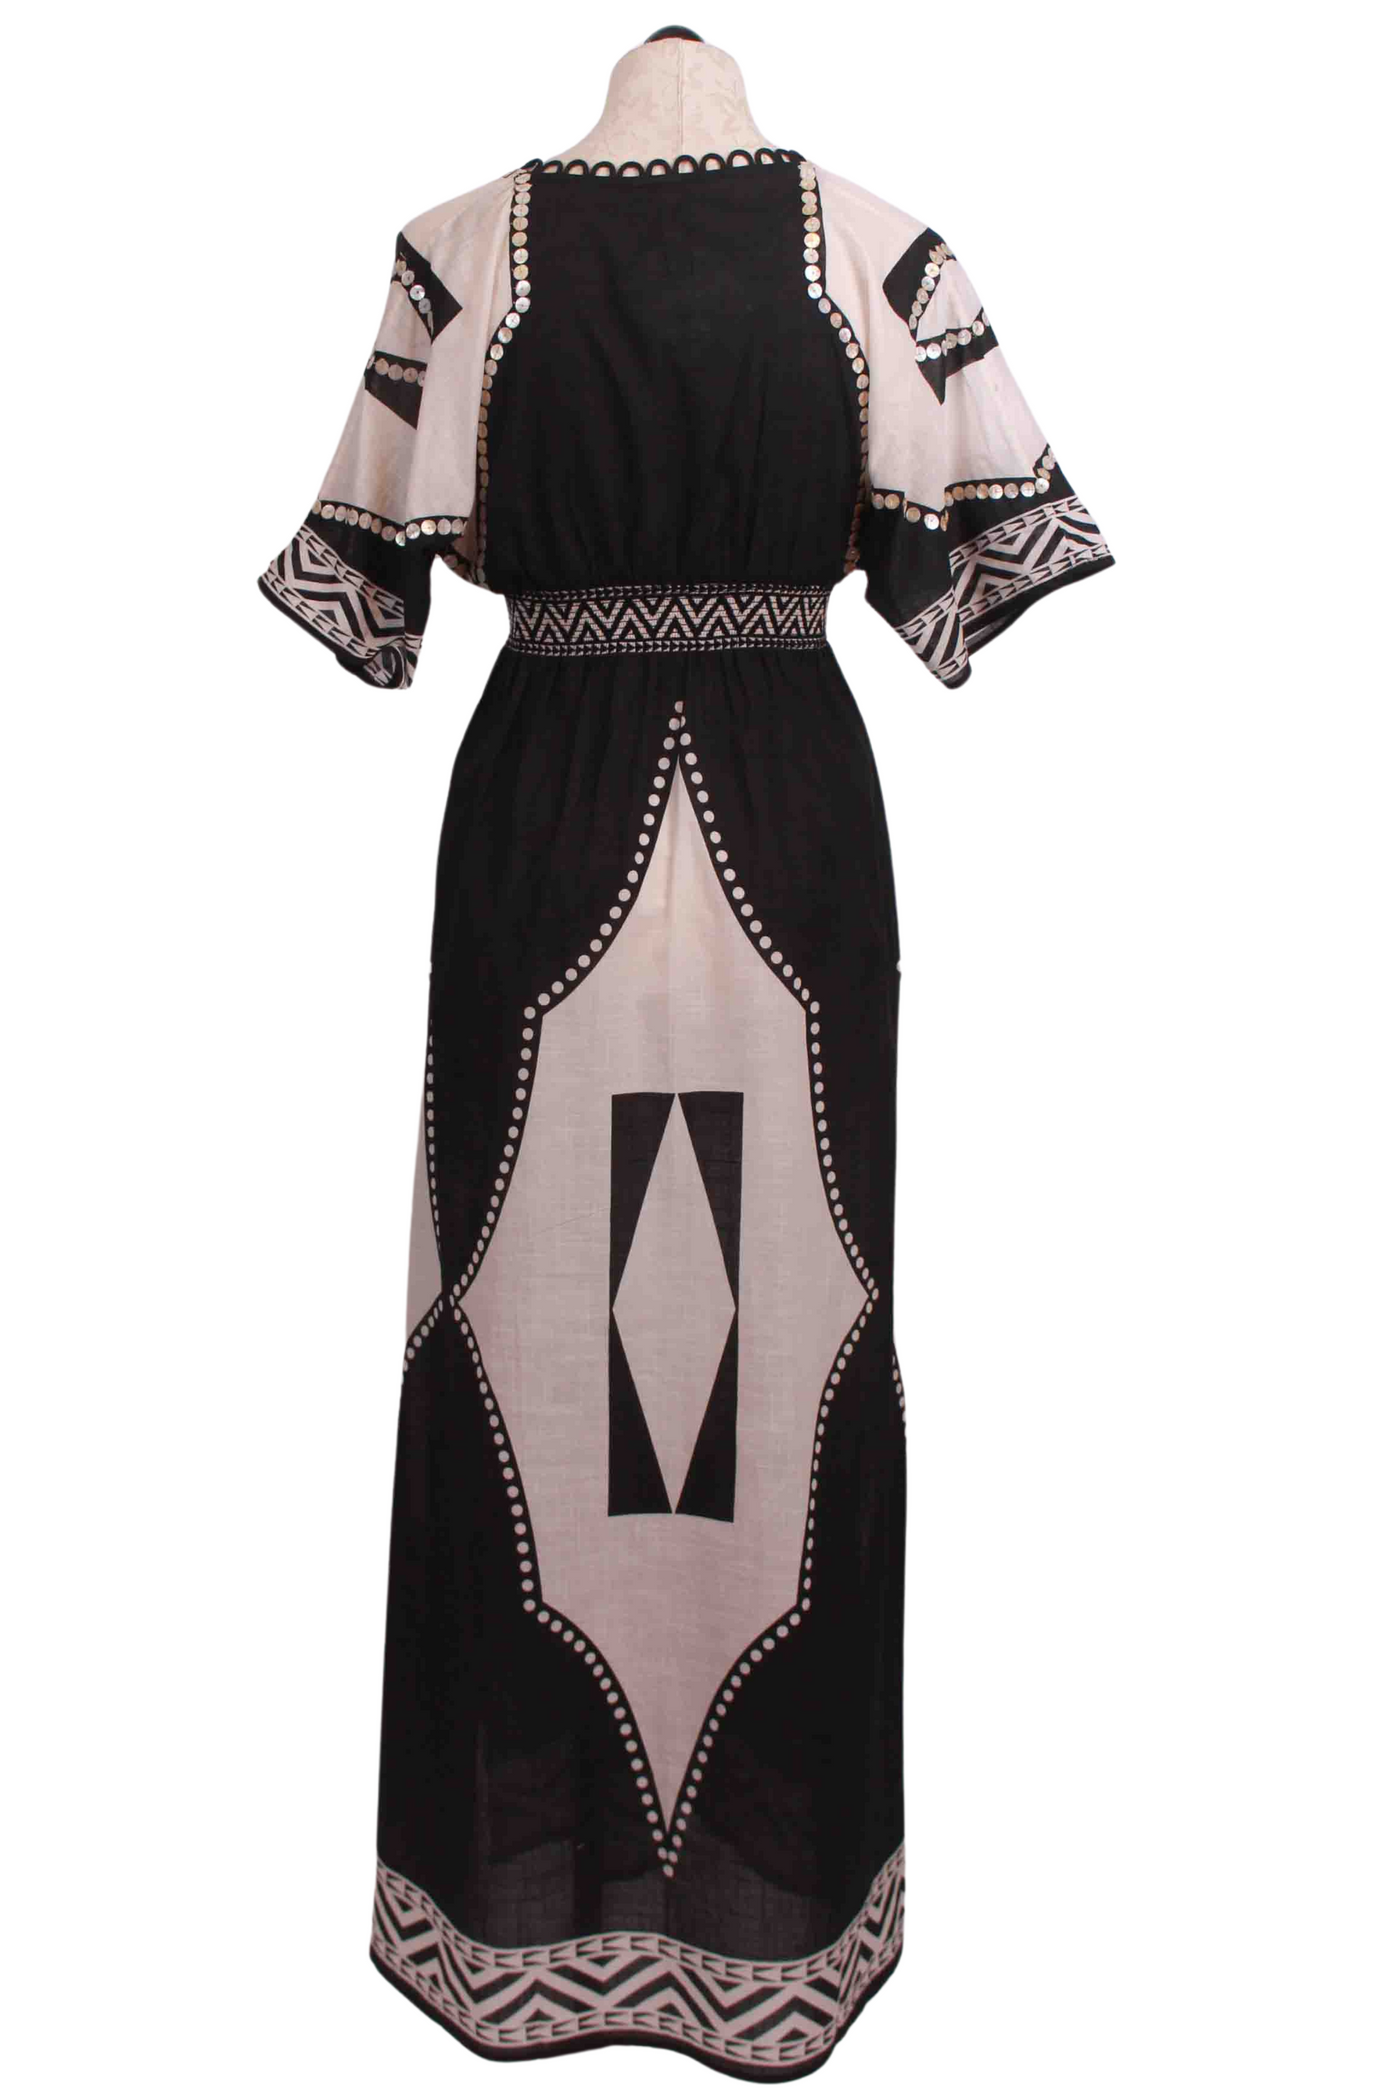 back view of Ying Yang/Onyx Black Shades of Light Long Dress by Scarlet Poppies